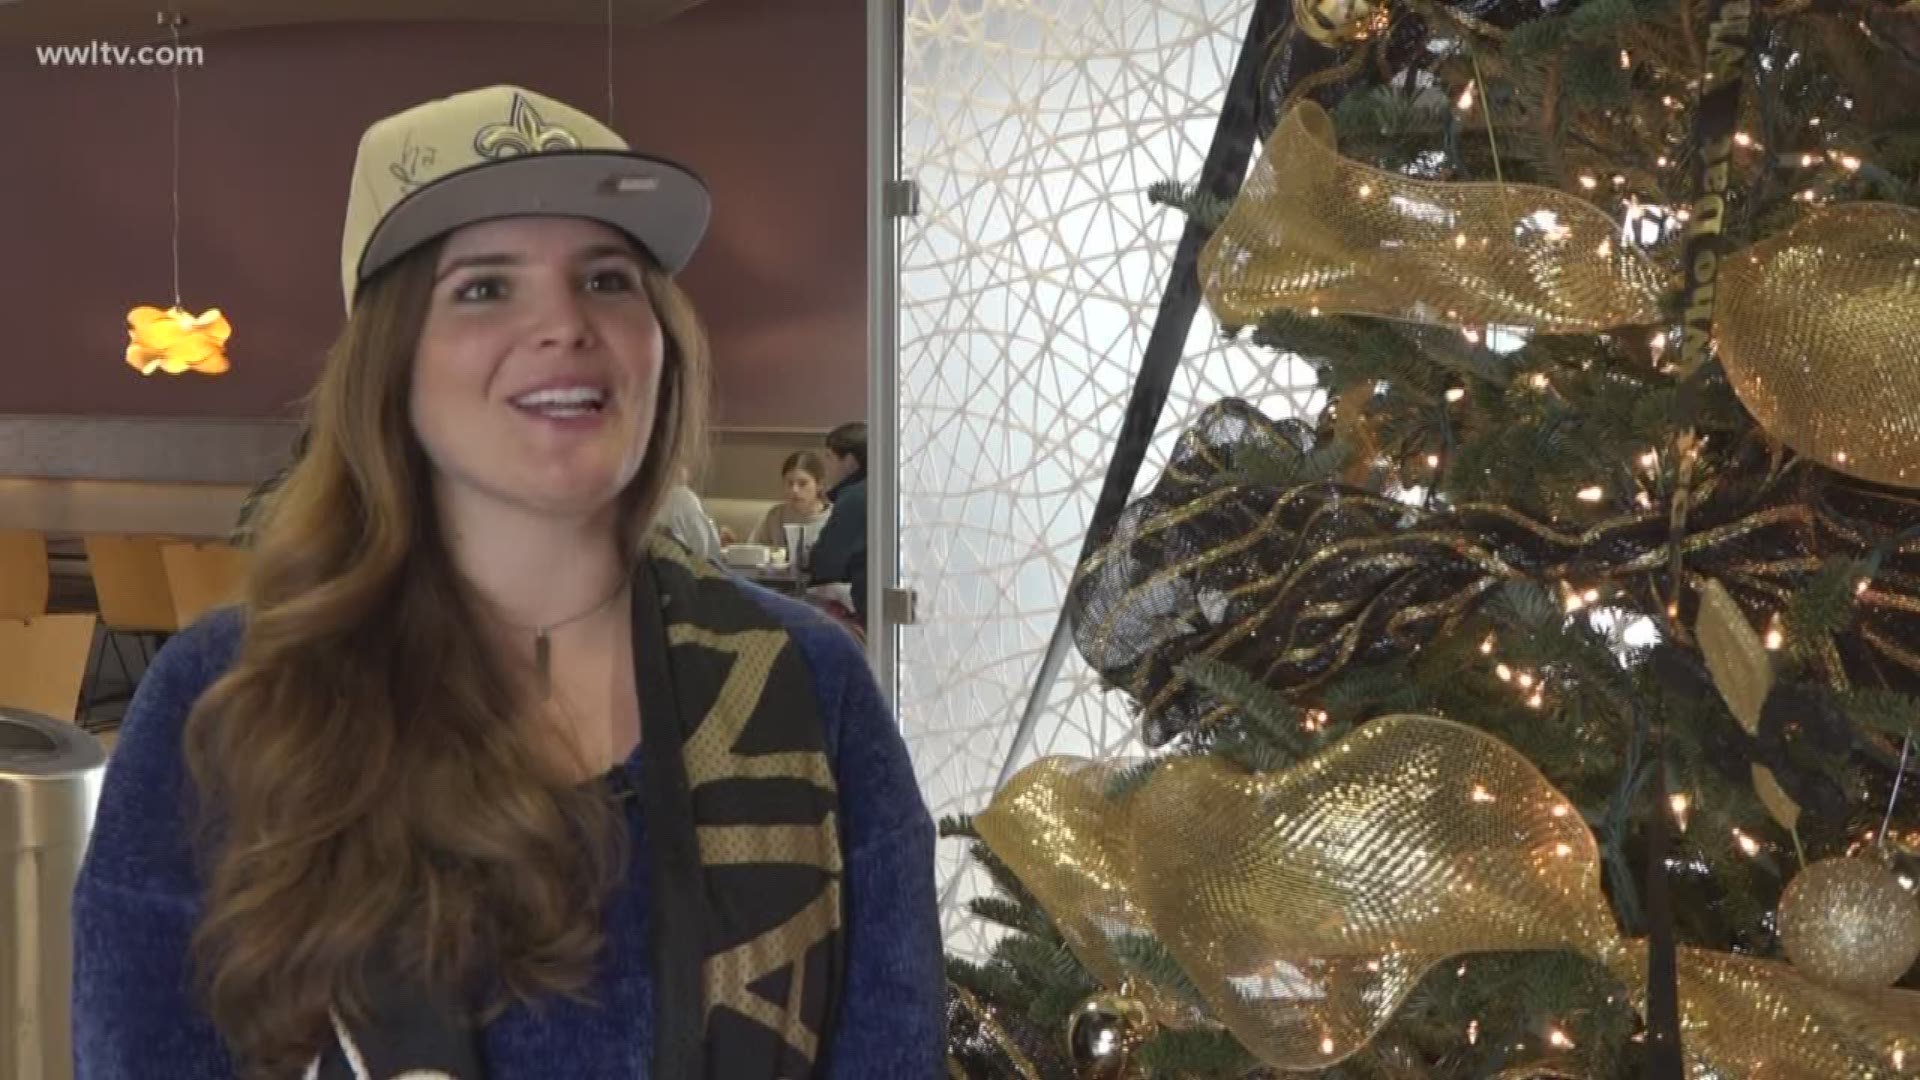 People are celebrating the New Orleans Saints special season with some 'black and gold' Christmas trees.